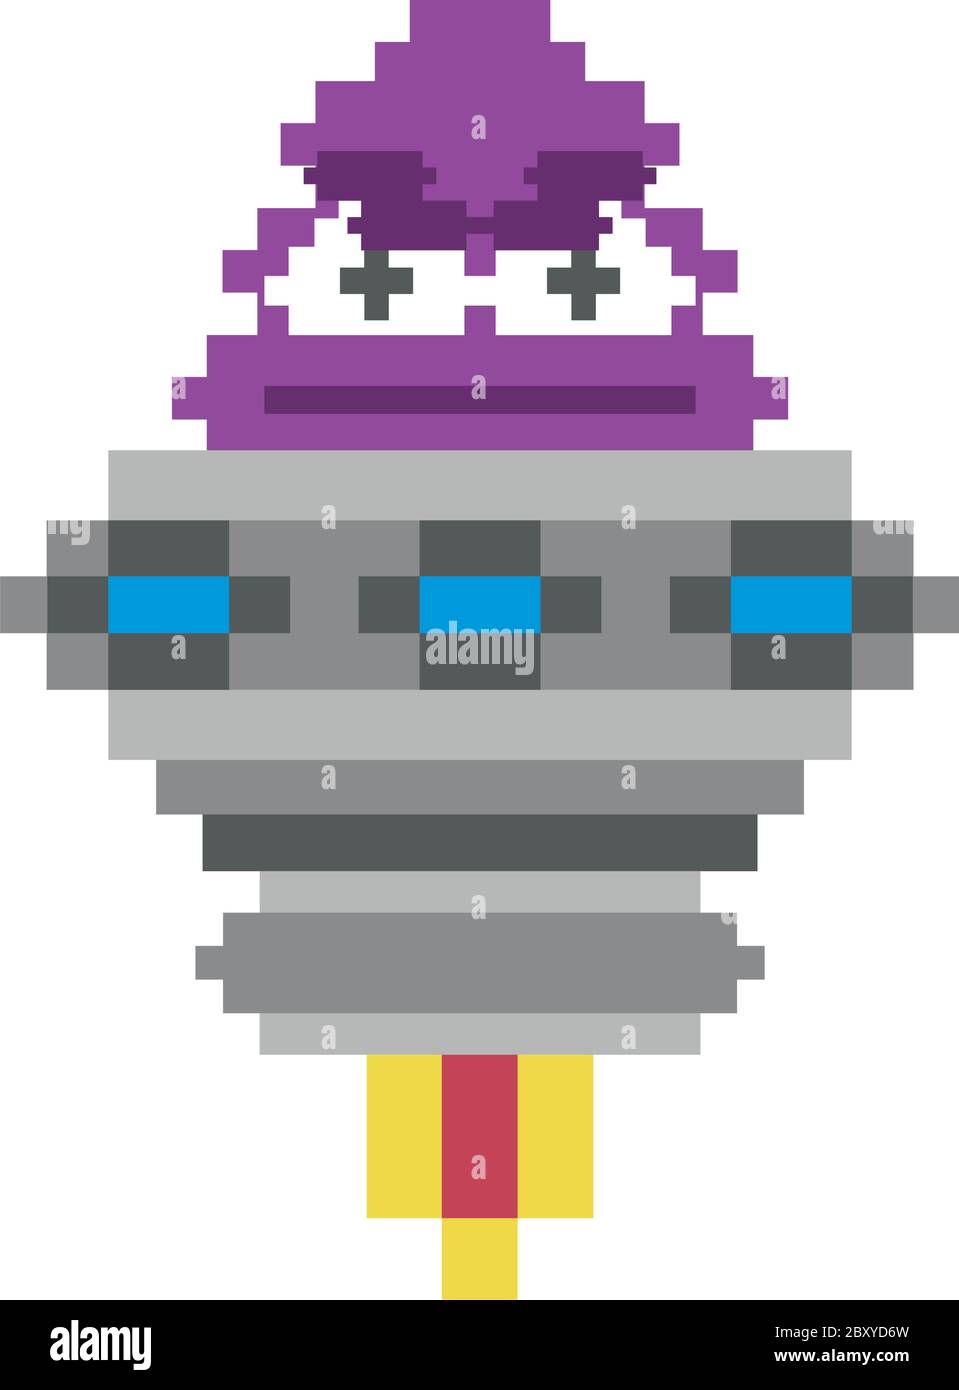 https://c8.alamy.com/comp/2BXYD6W/space-alien-in-ufo-8-bits-pixelated-icon-vector-illustration-design-2BXYD6W.jpg